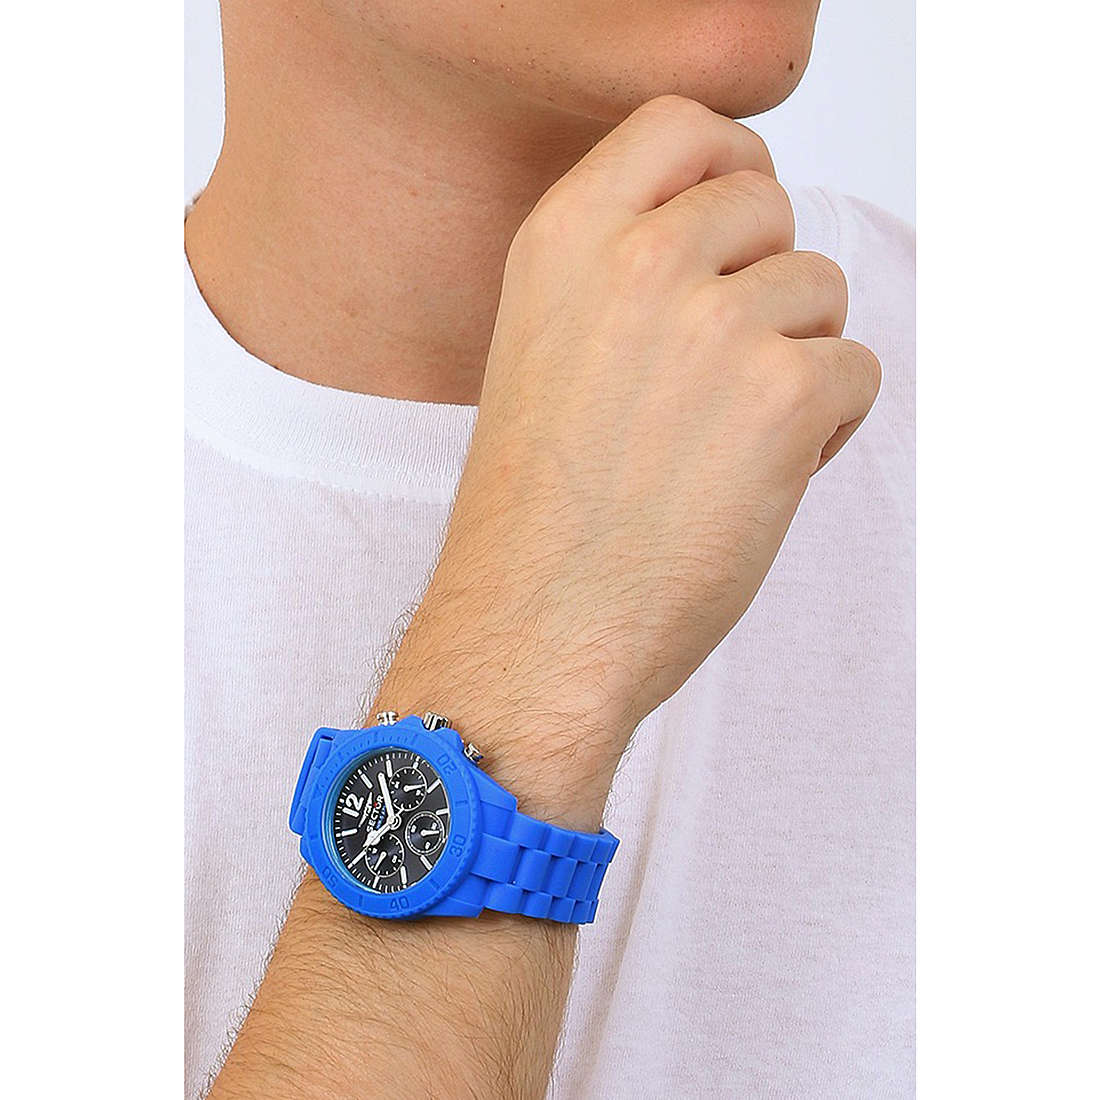 Sector multifunction Diver man R3251549005 wearing